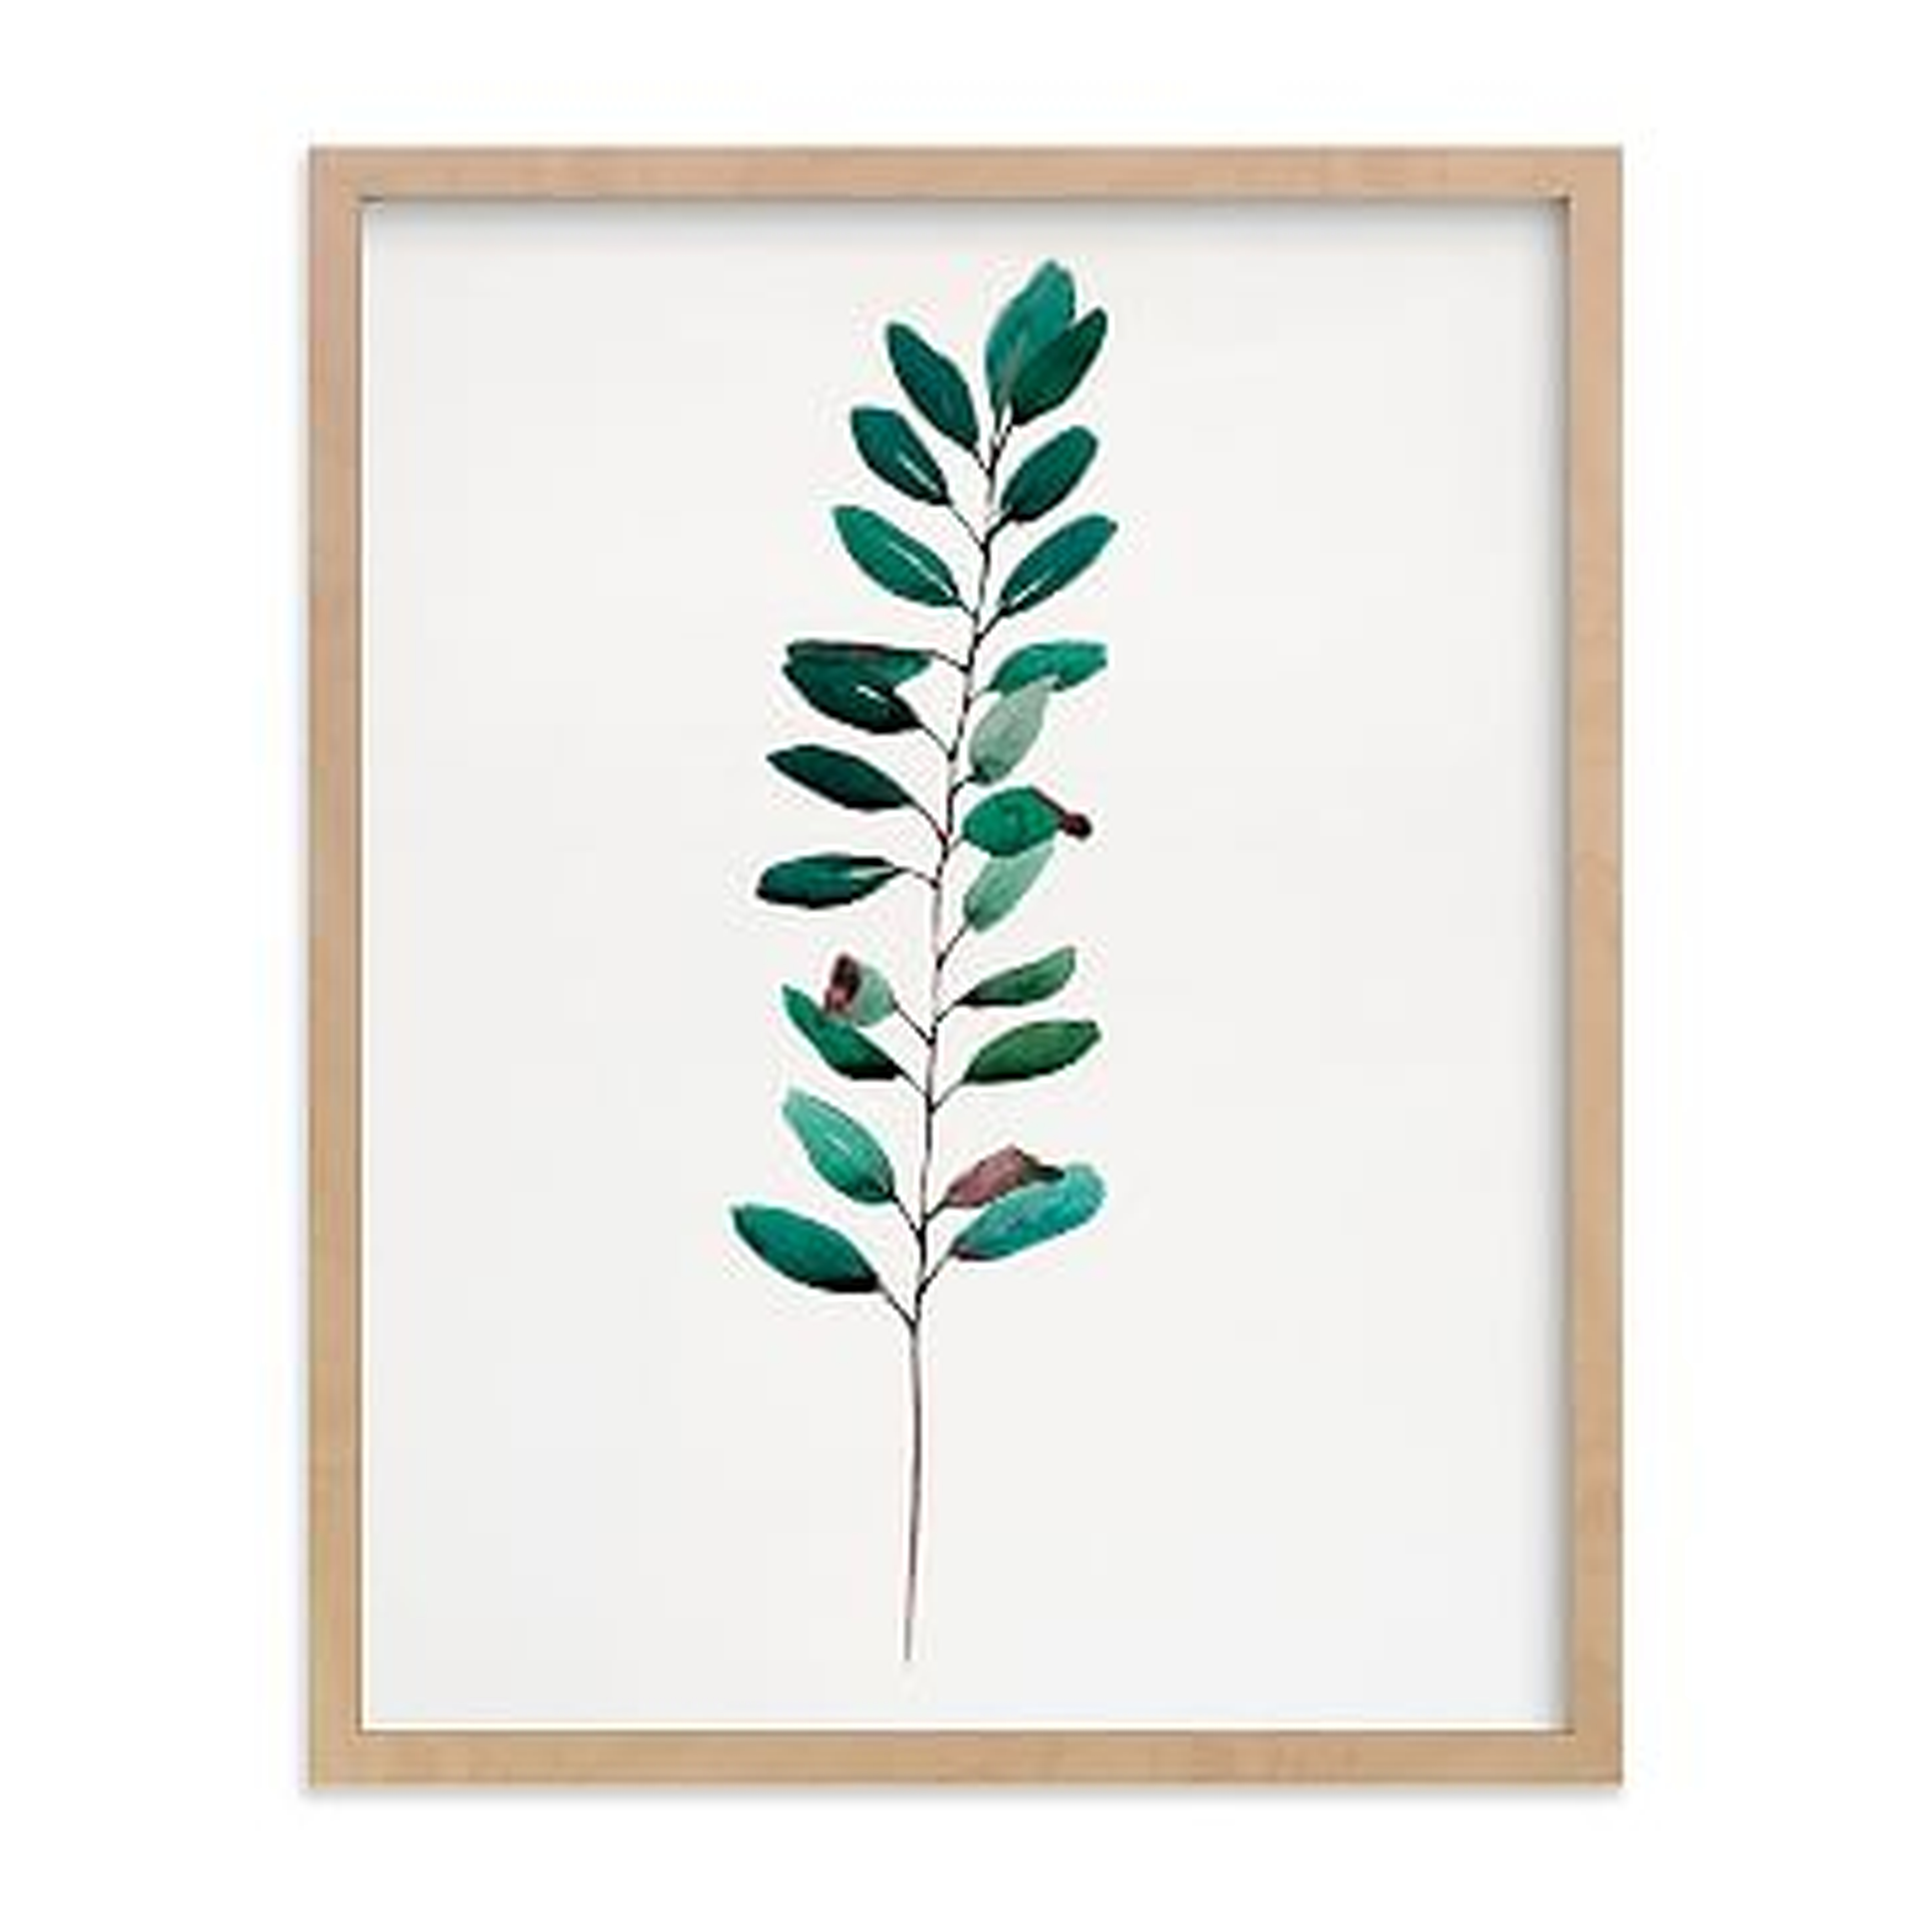 Curry Tree, Full Bleed 11"x14", Natural Wood Frame - West Elm